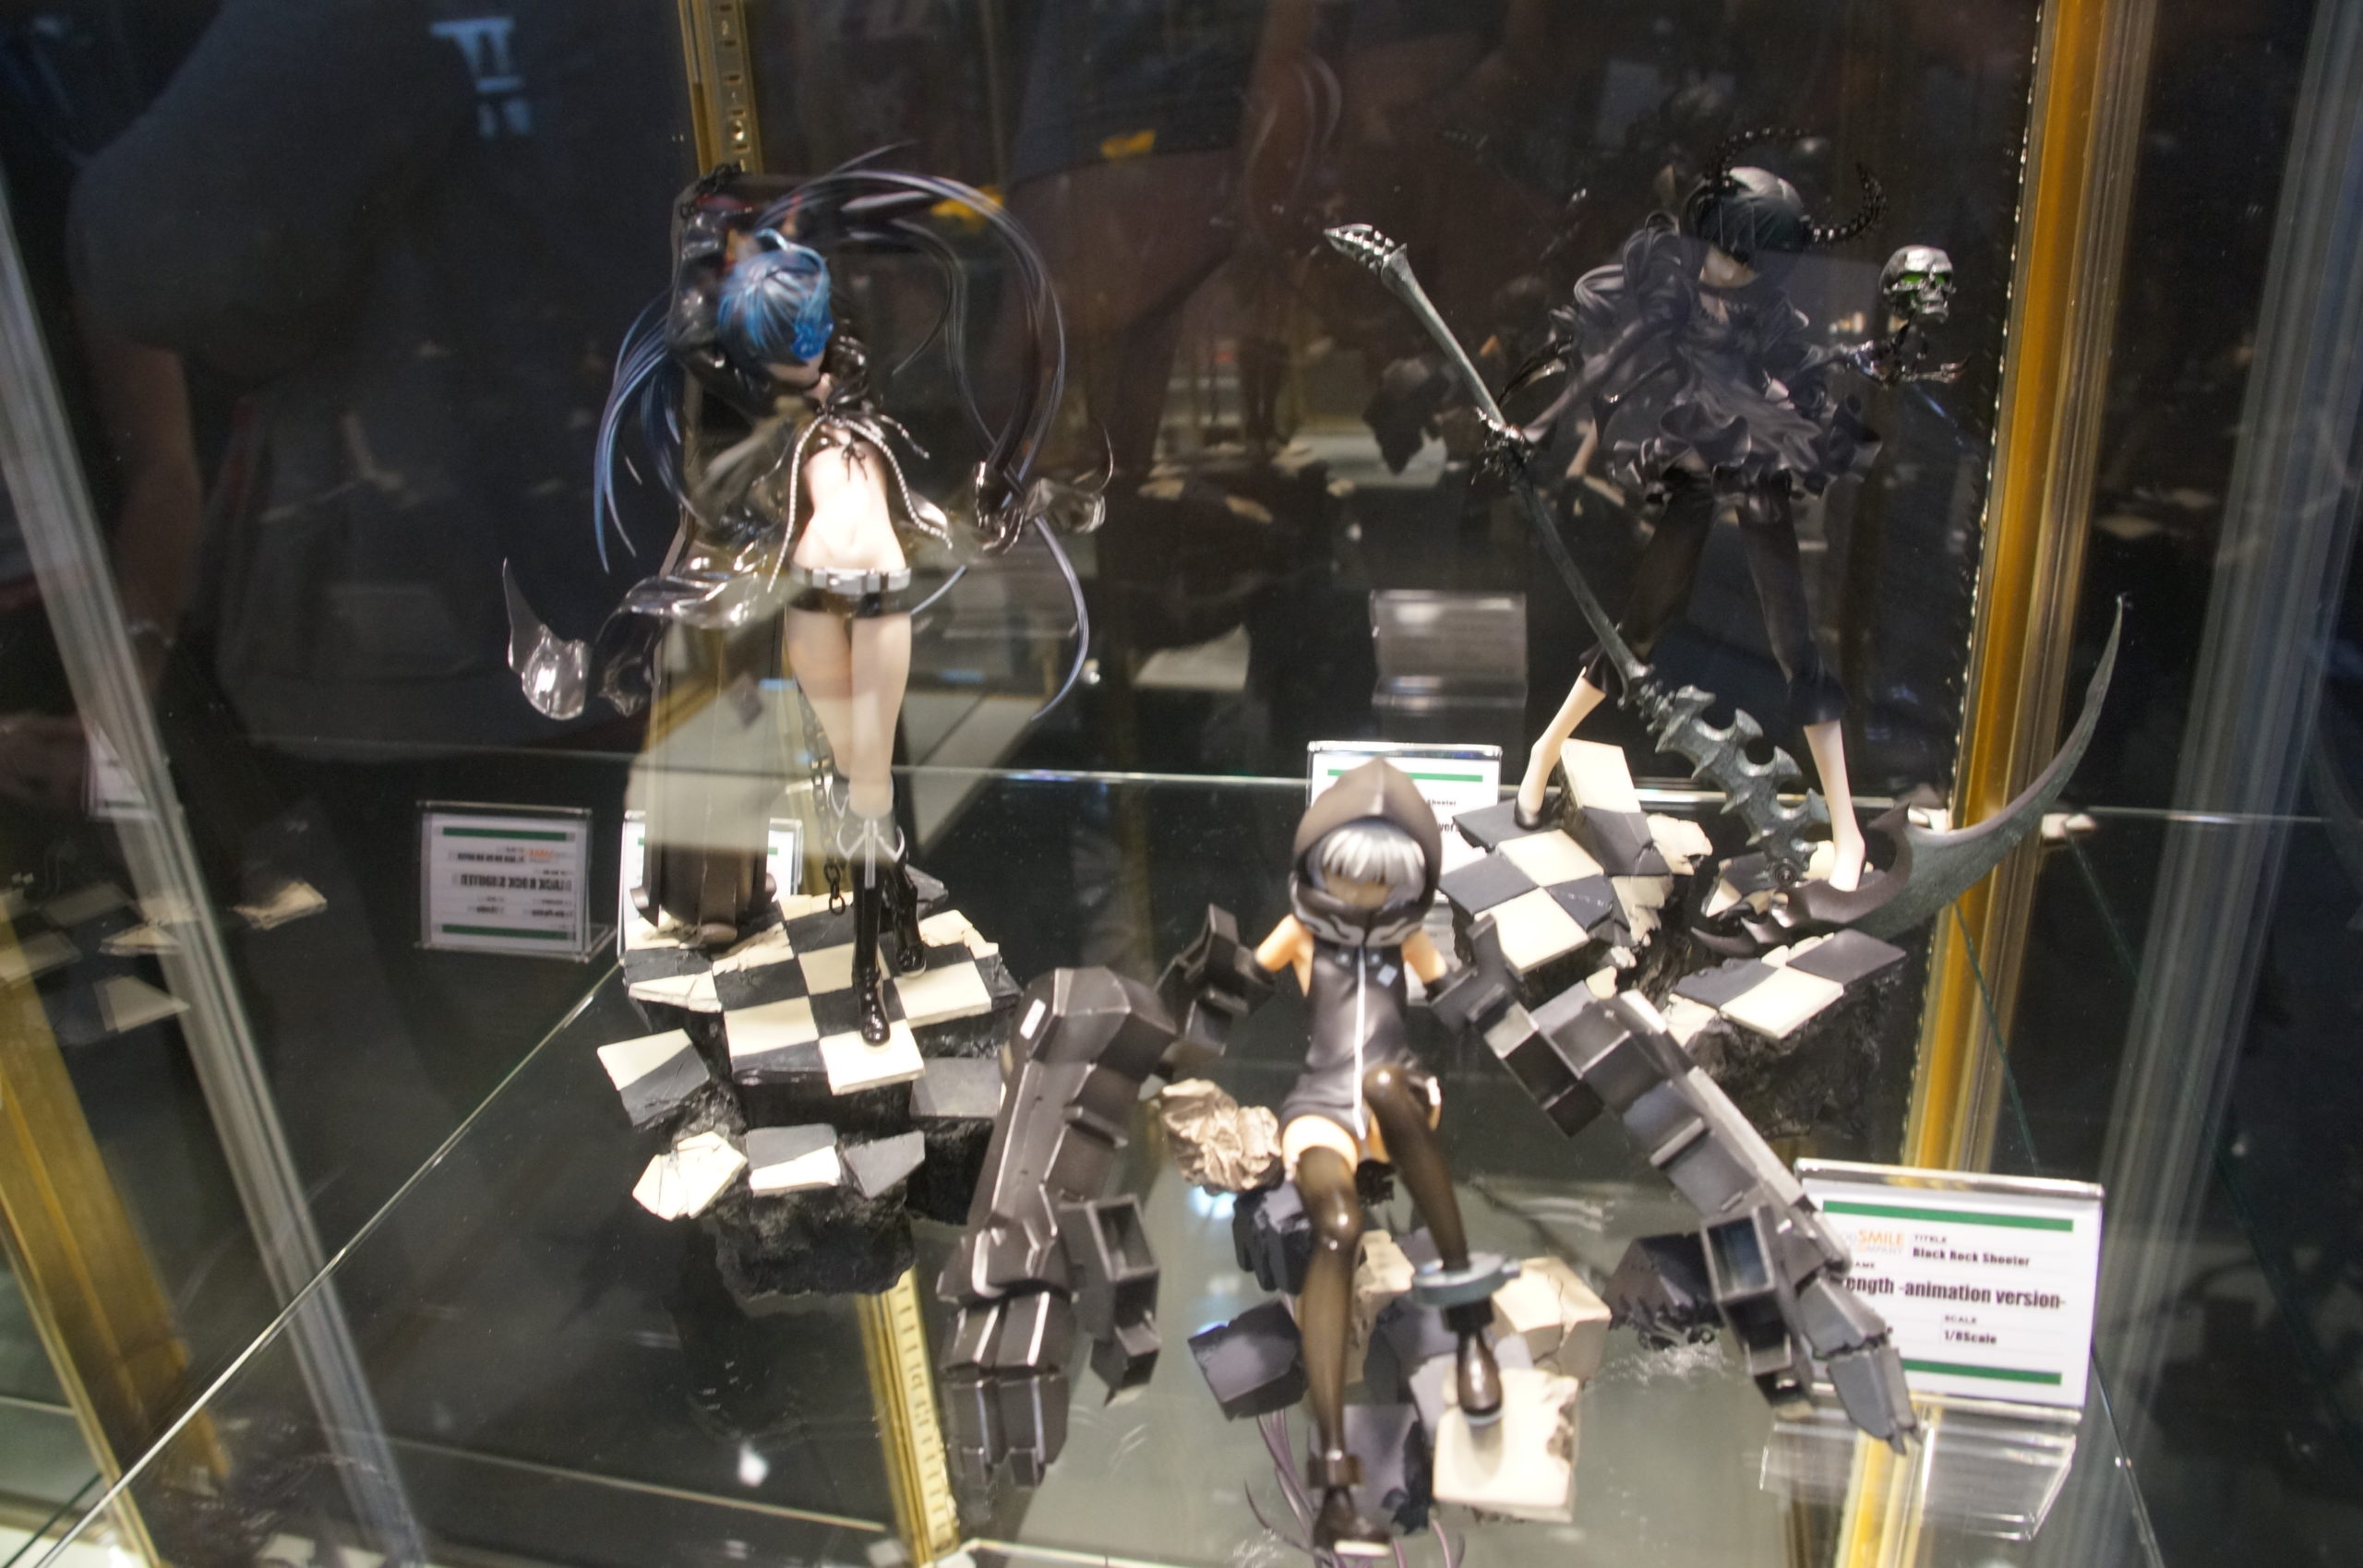 Cool Anime Toys We Saw At Toy Fair